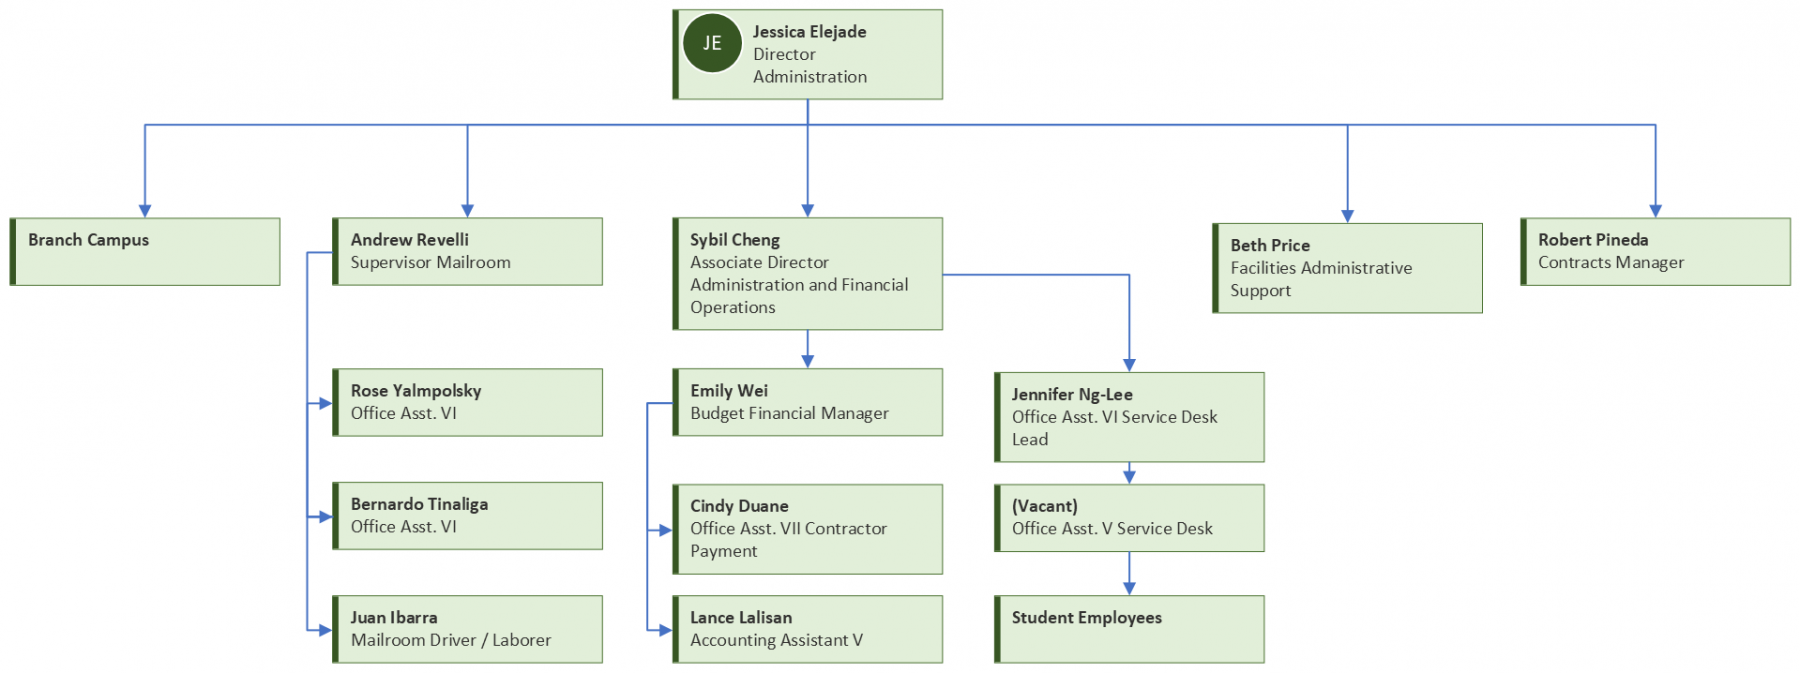 Facilities Org Chart - Administrative Services